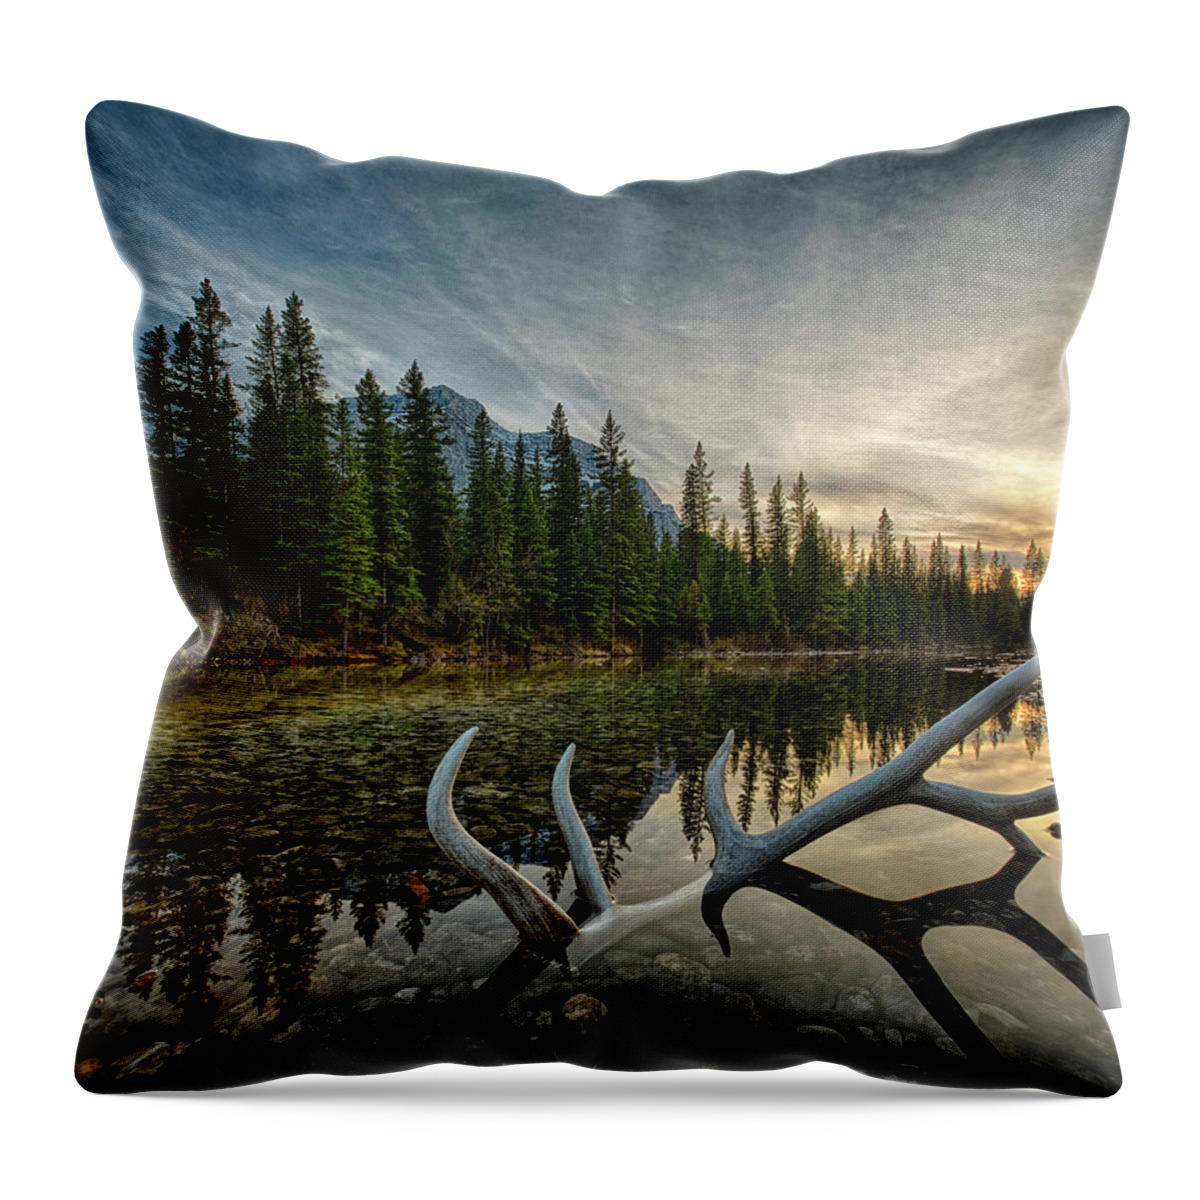 Scenics Throw Pillow featuring the photograph Elk Antler Adds Reflection To Mountain by Ascent Xmedia